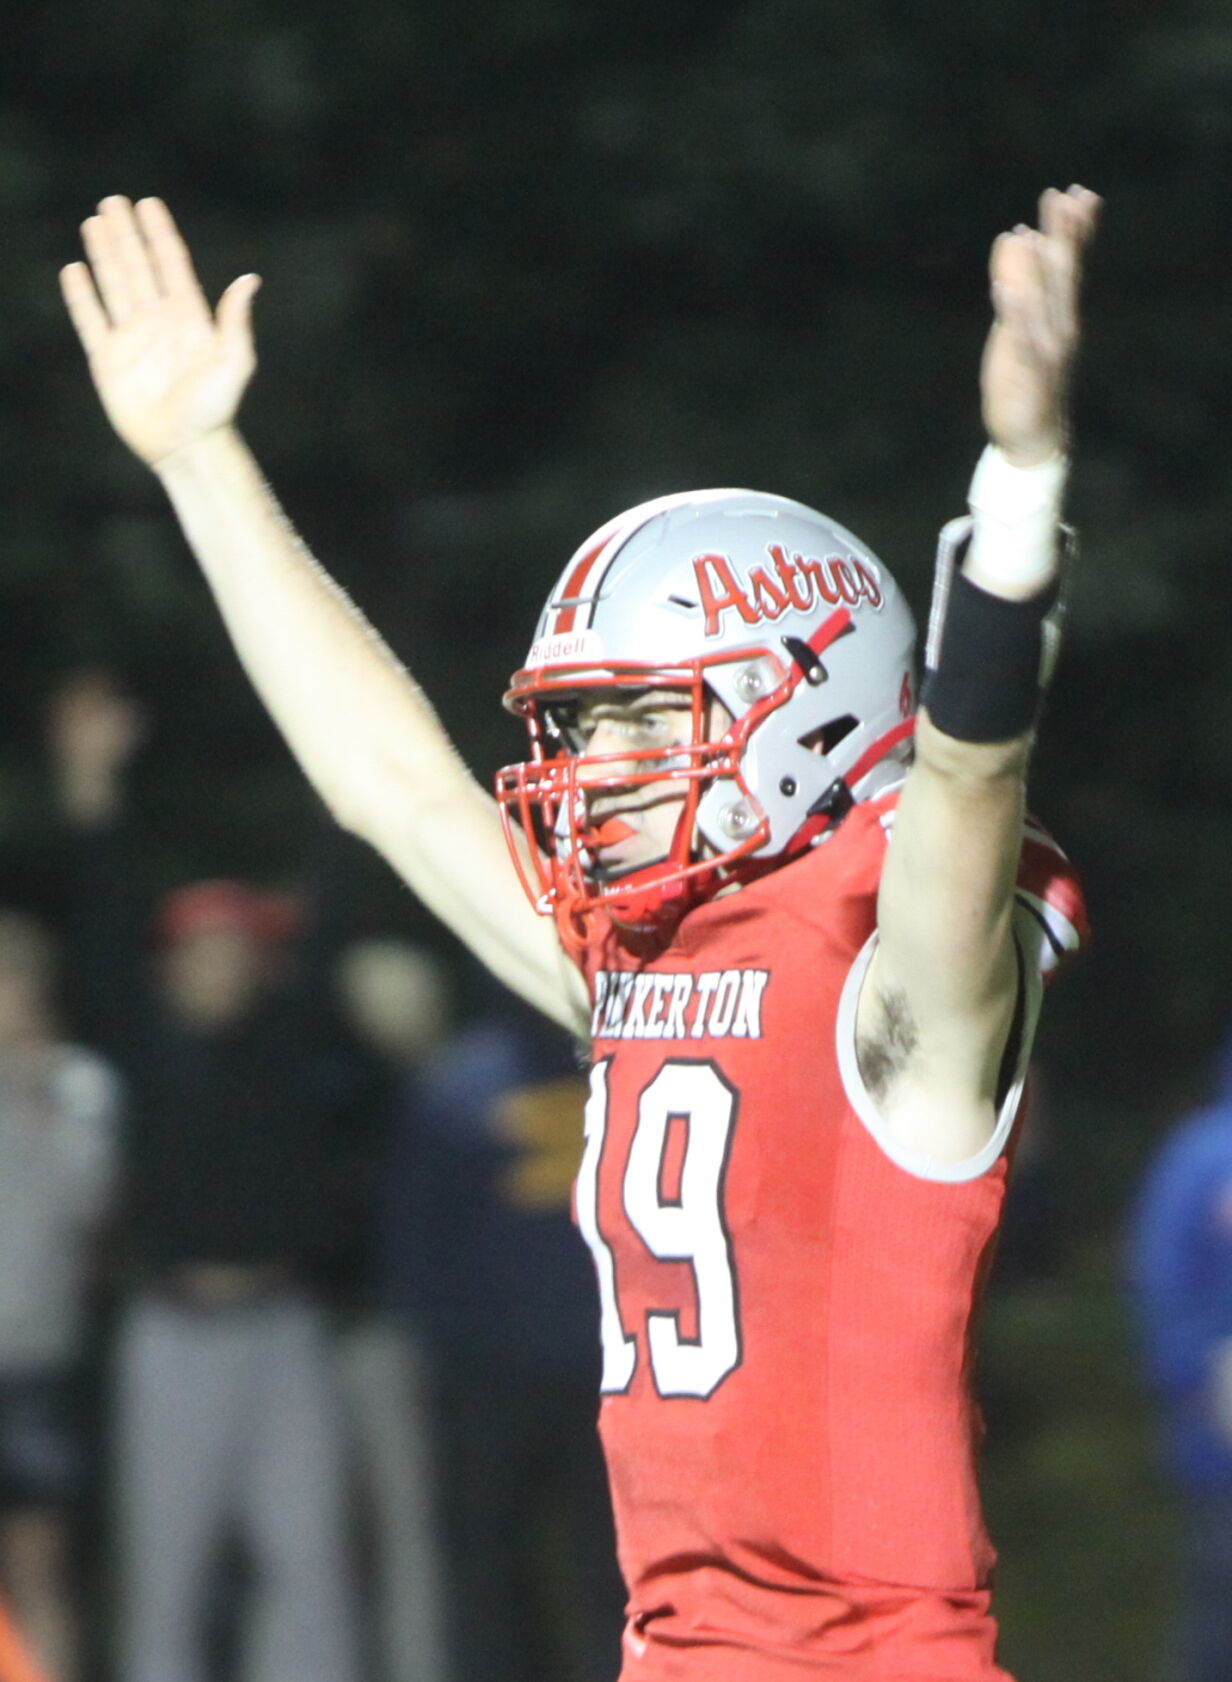 Pinkerton Academy earns thrilling 24-20 victory over Londonderry